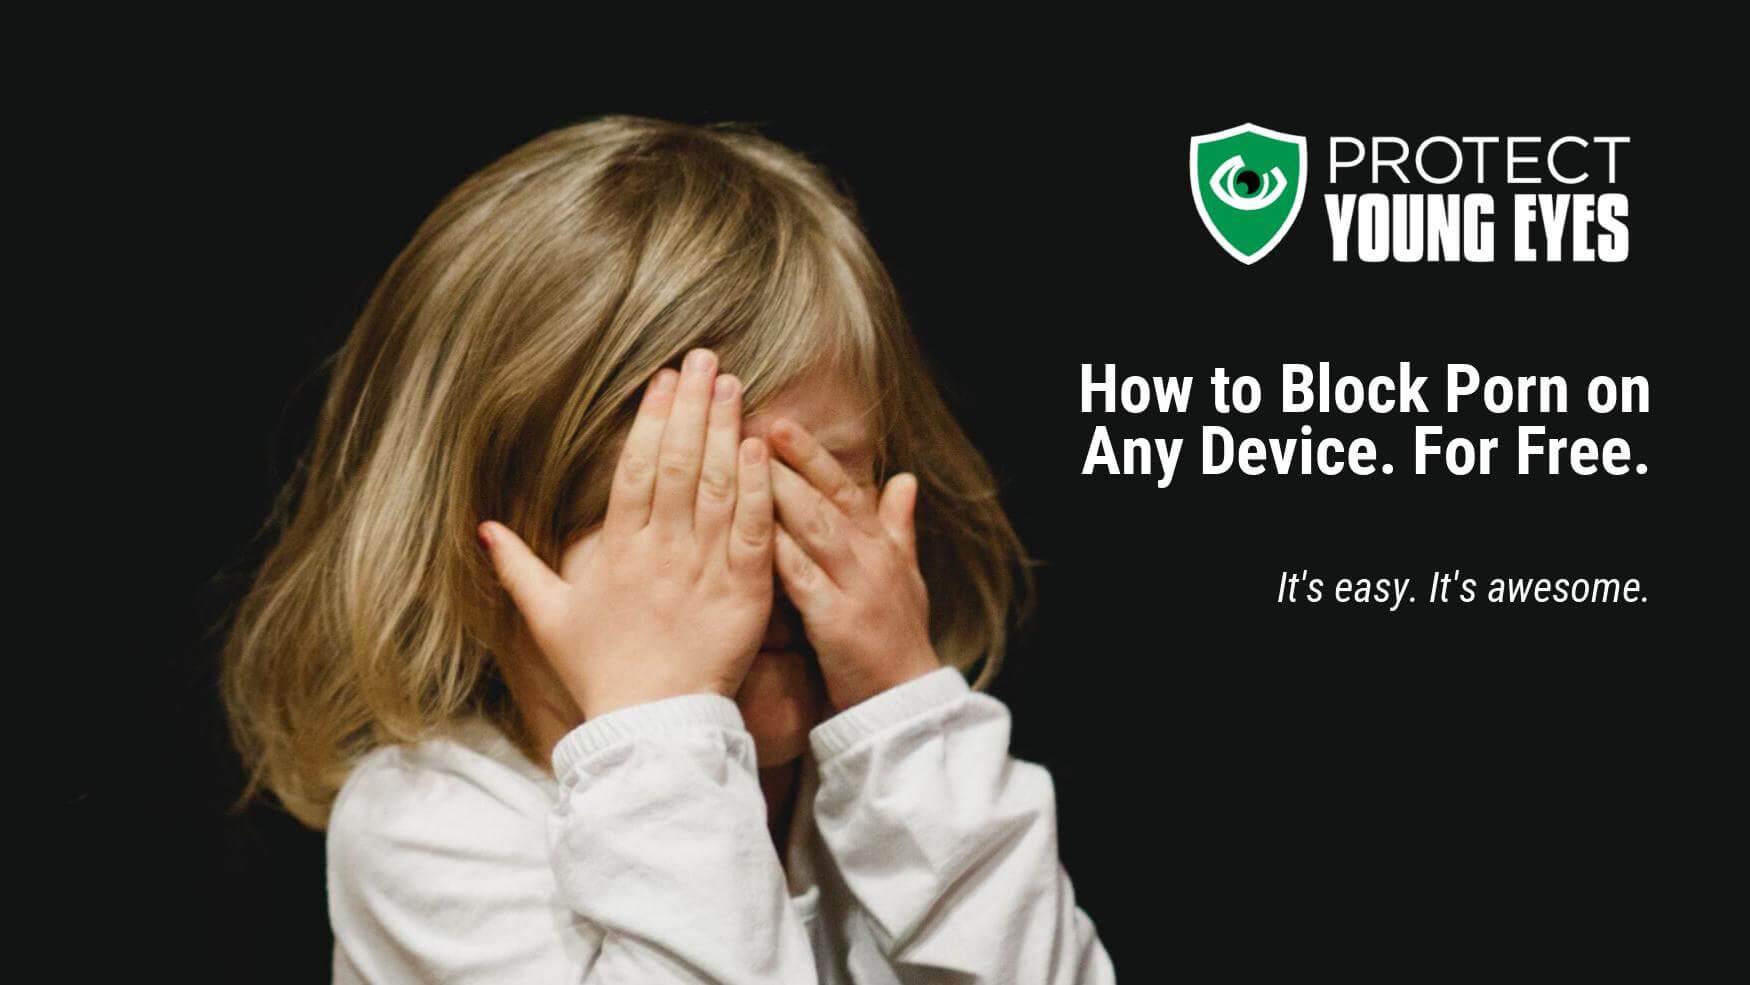 Www Poen - How to Block Porn on Any Device. For Free. A Protect Young Eyes Post.